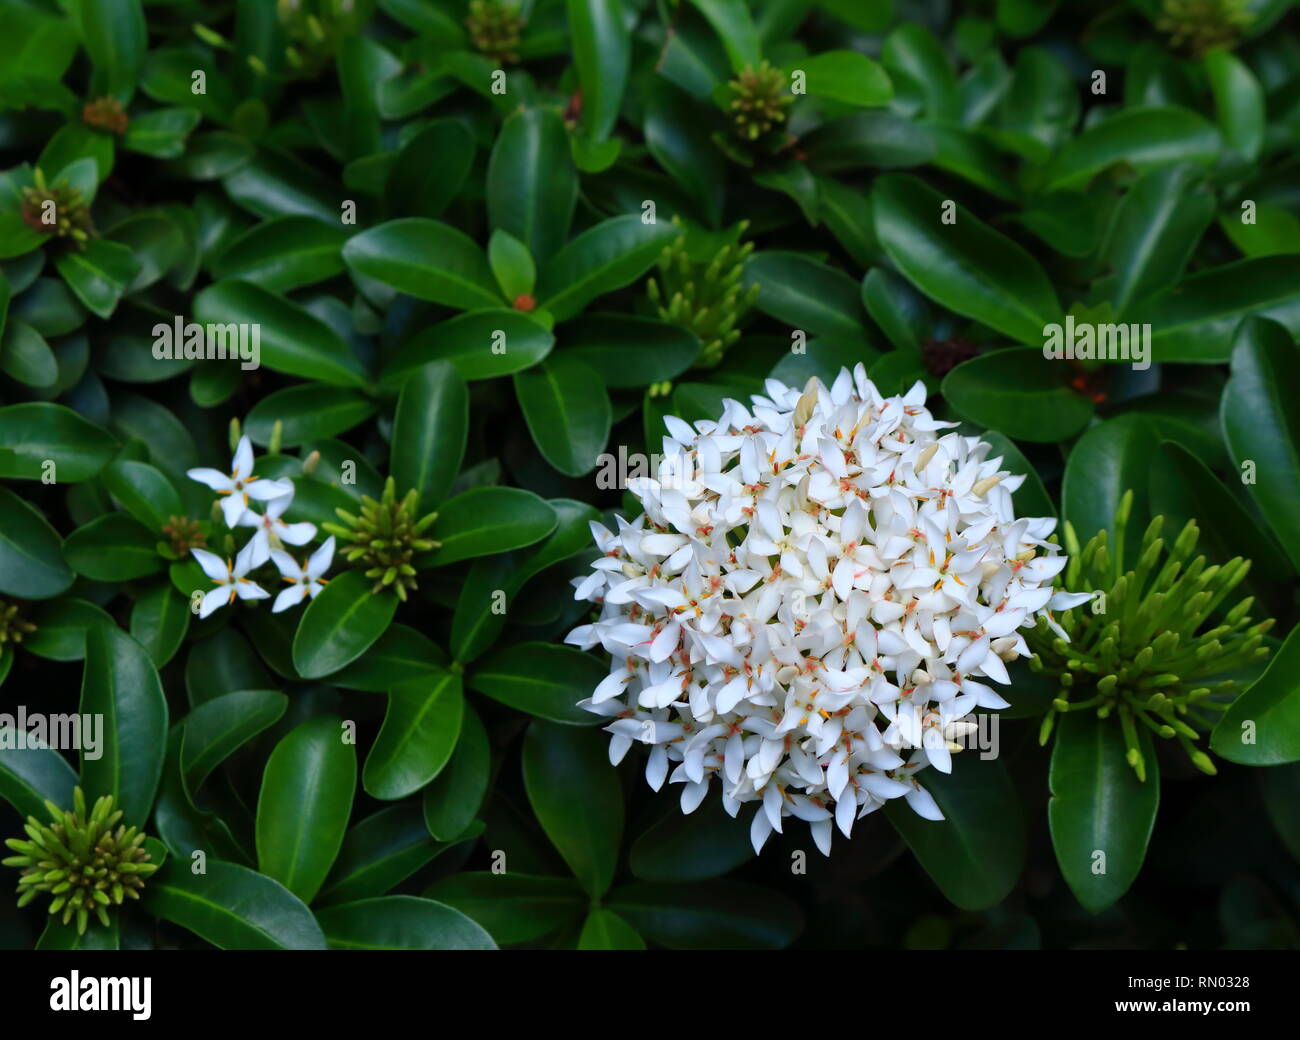 closeup of blooming white spike flowers or ixora in garden Stock Photo